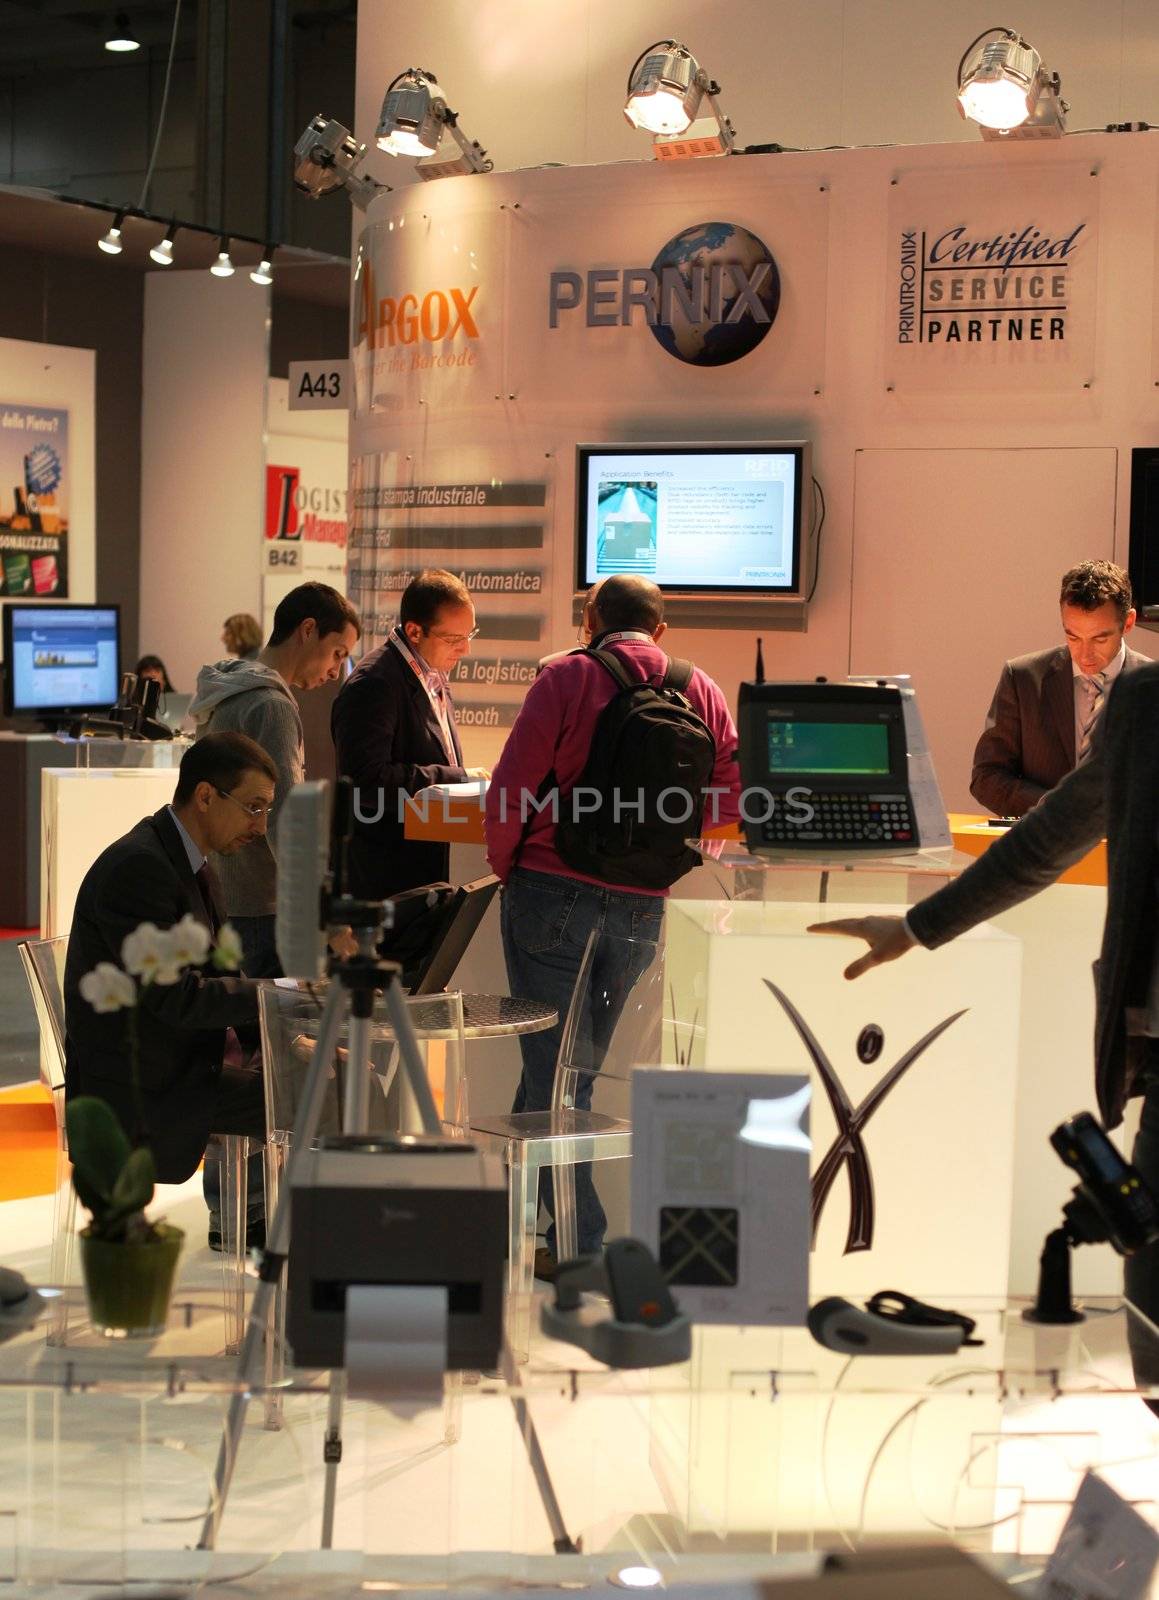 People asking for information at Smau, national fair of business intelligence and information technology October 21, 2009 in Milan, Italy.